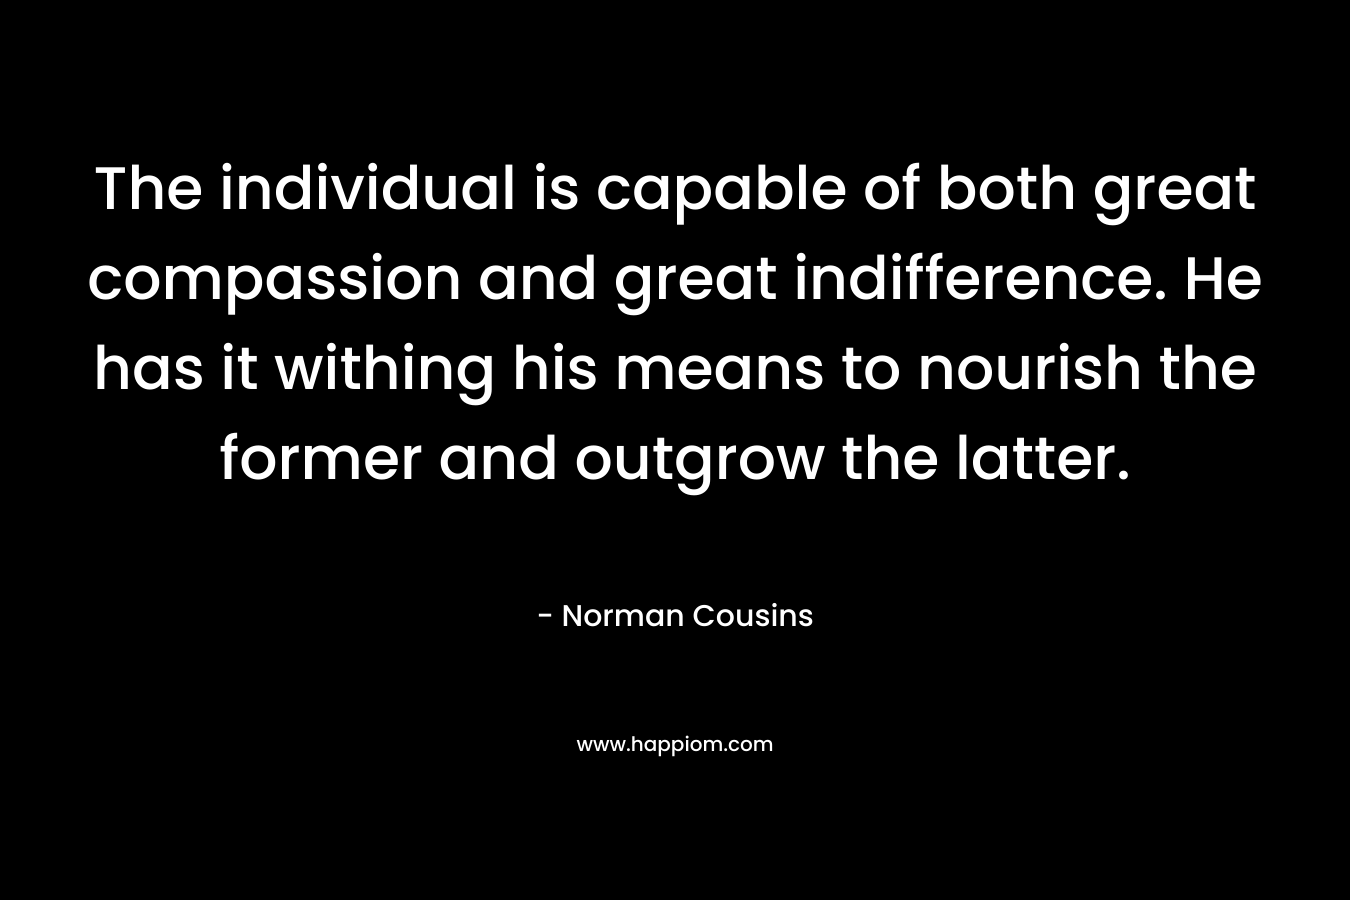 The individual is capable of both great compassion and great indifference. He has it withing his means to nourish the former and outgrow the latter. – Norman Cousins